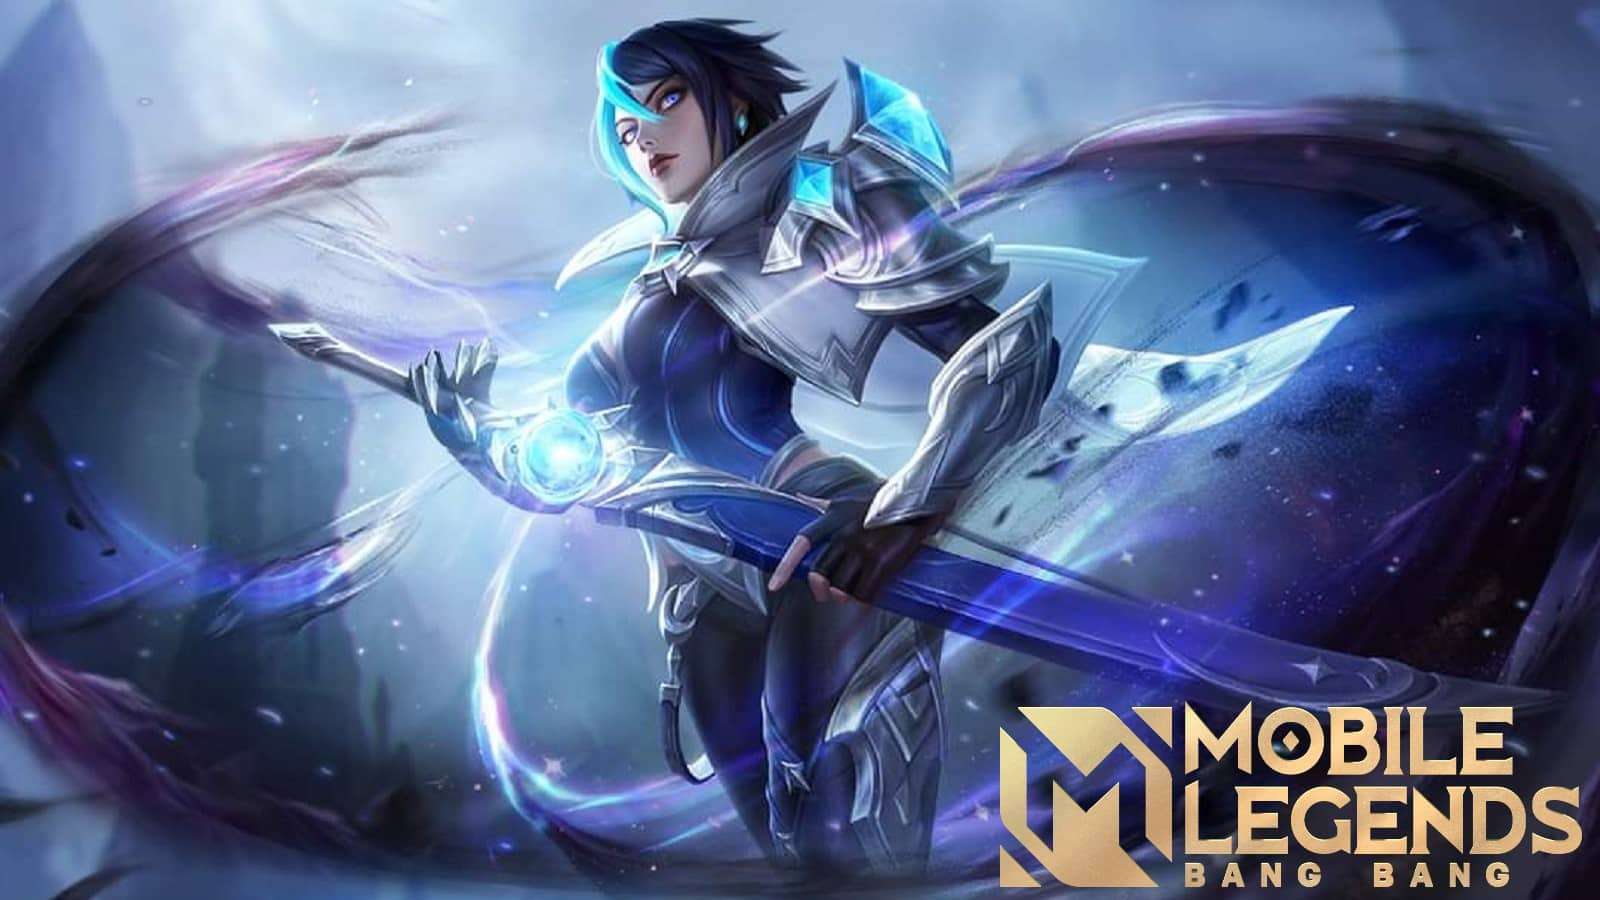 cover art for Mobile Legends featuring Benedetta